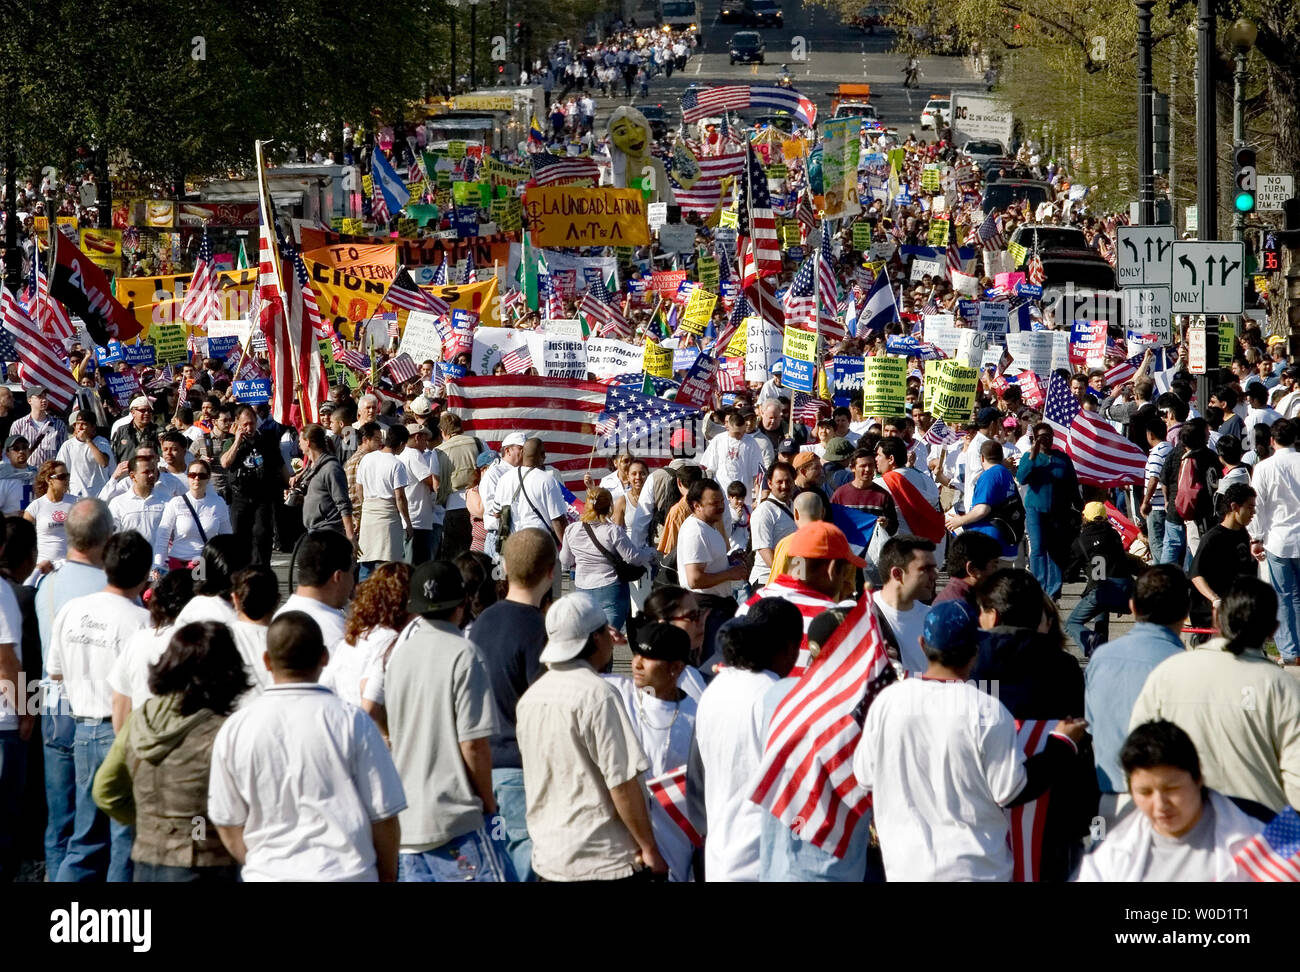 Tens of thousands of immigrants and their supporters march during a rally in Washington on April 10, 2006. Across the U.S. hundreds of thousands of protestors rallied today against a House bill that would criminalize illegal immigrants and for reform measures that would protect their rights.  (UPI Photo/Chris Rossi) Stock Photo